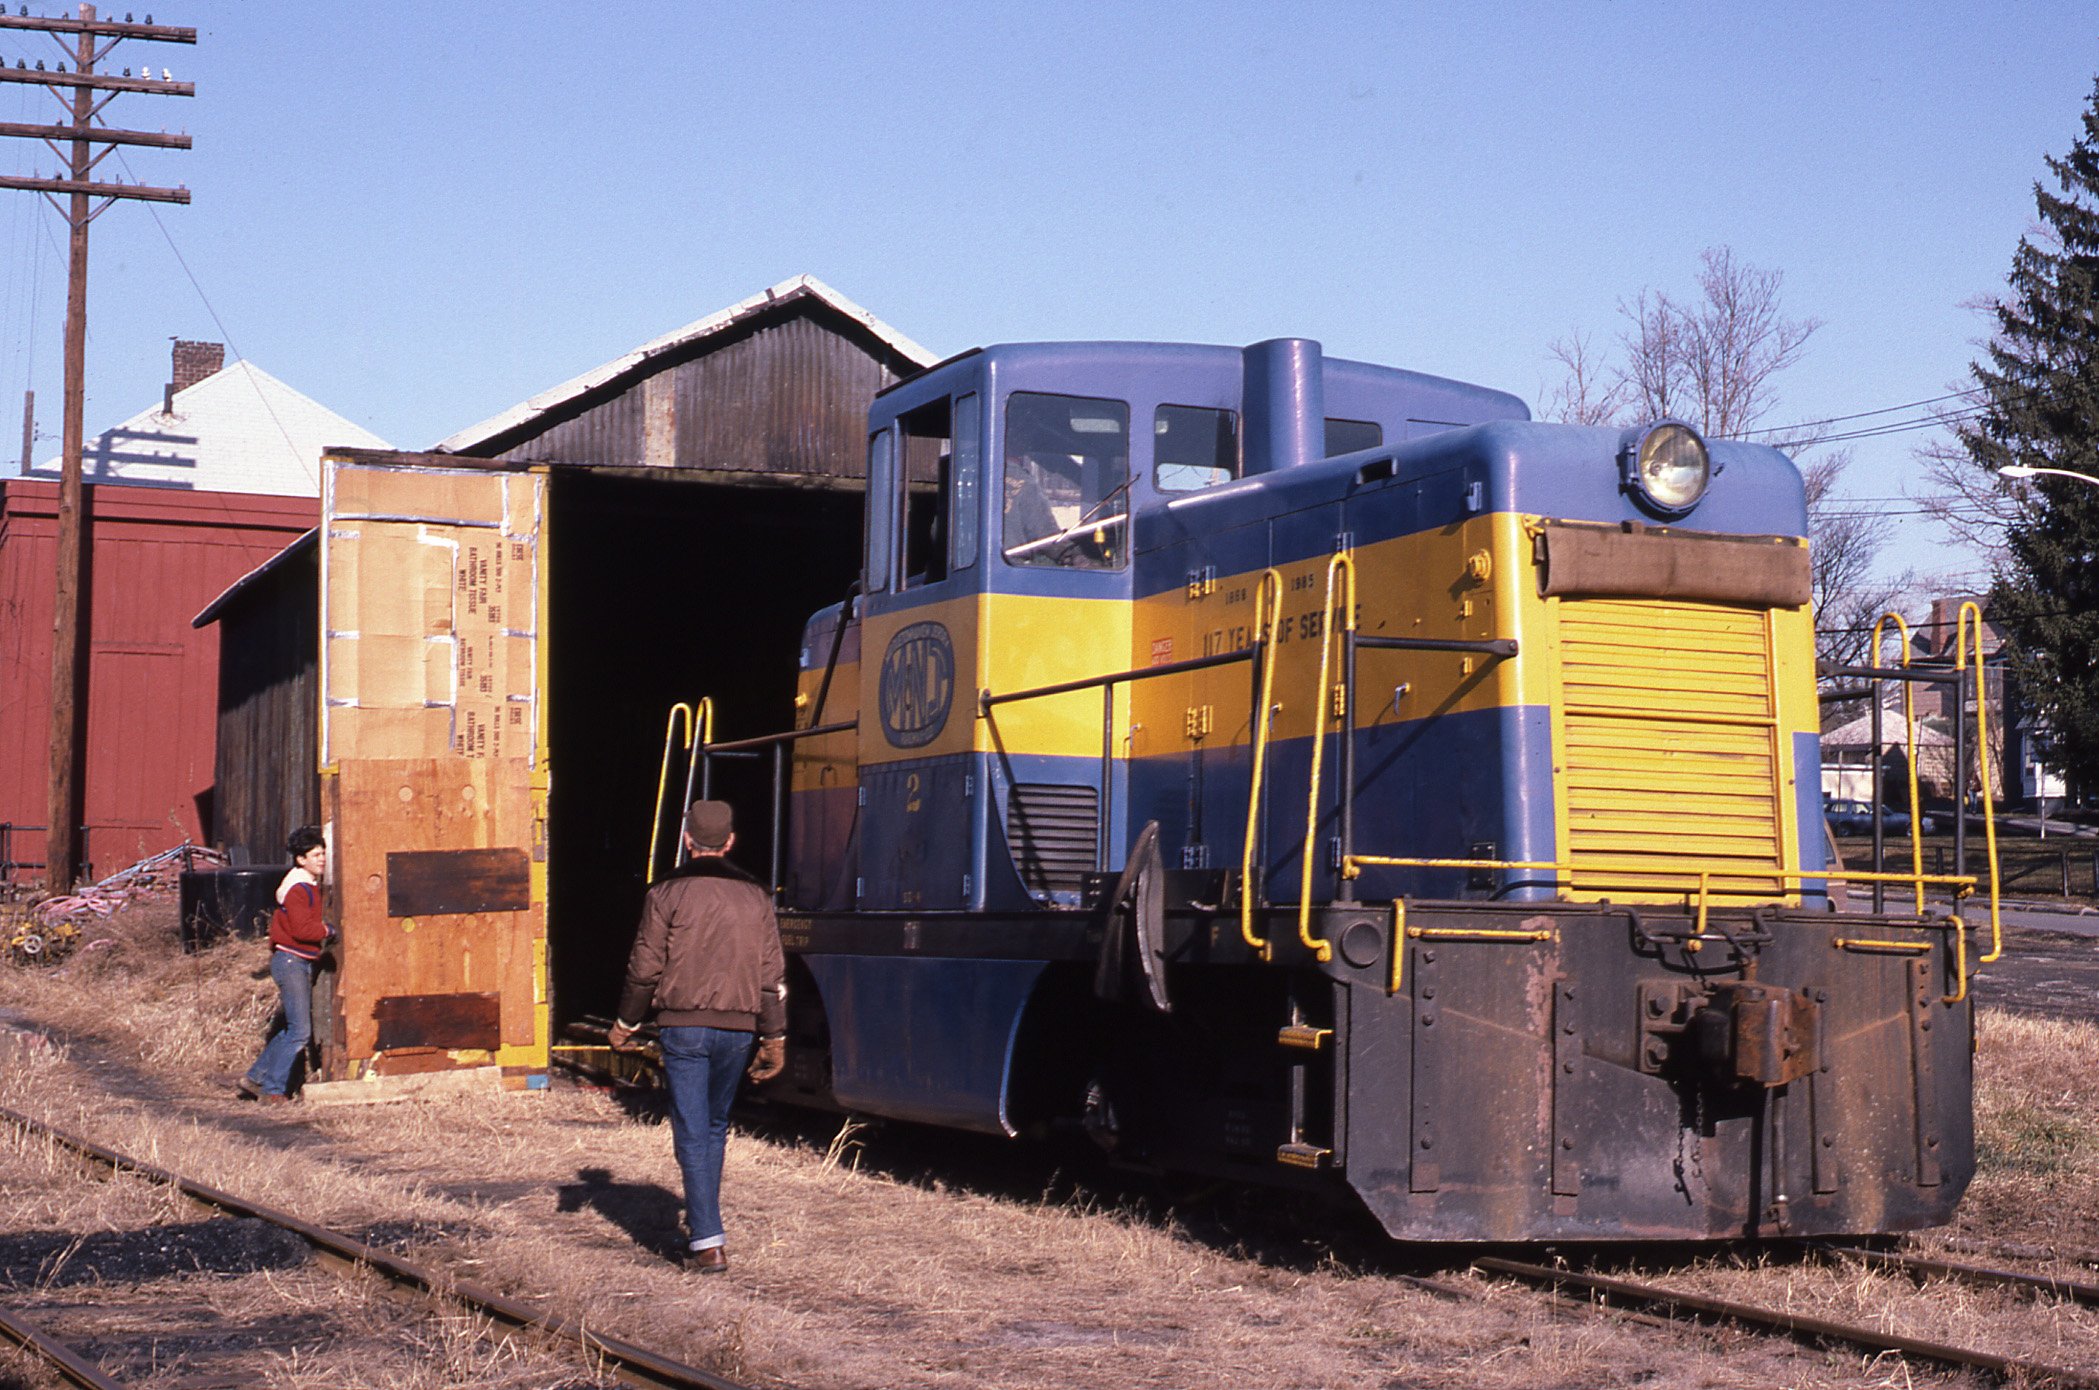   December 23, 1986 in Middletown, NY - Middletown &amp; New Jersey Railroad Historical Society archives collection  